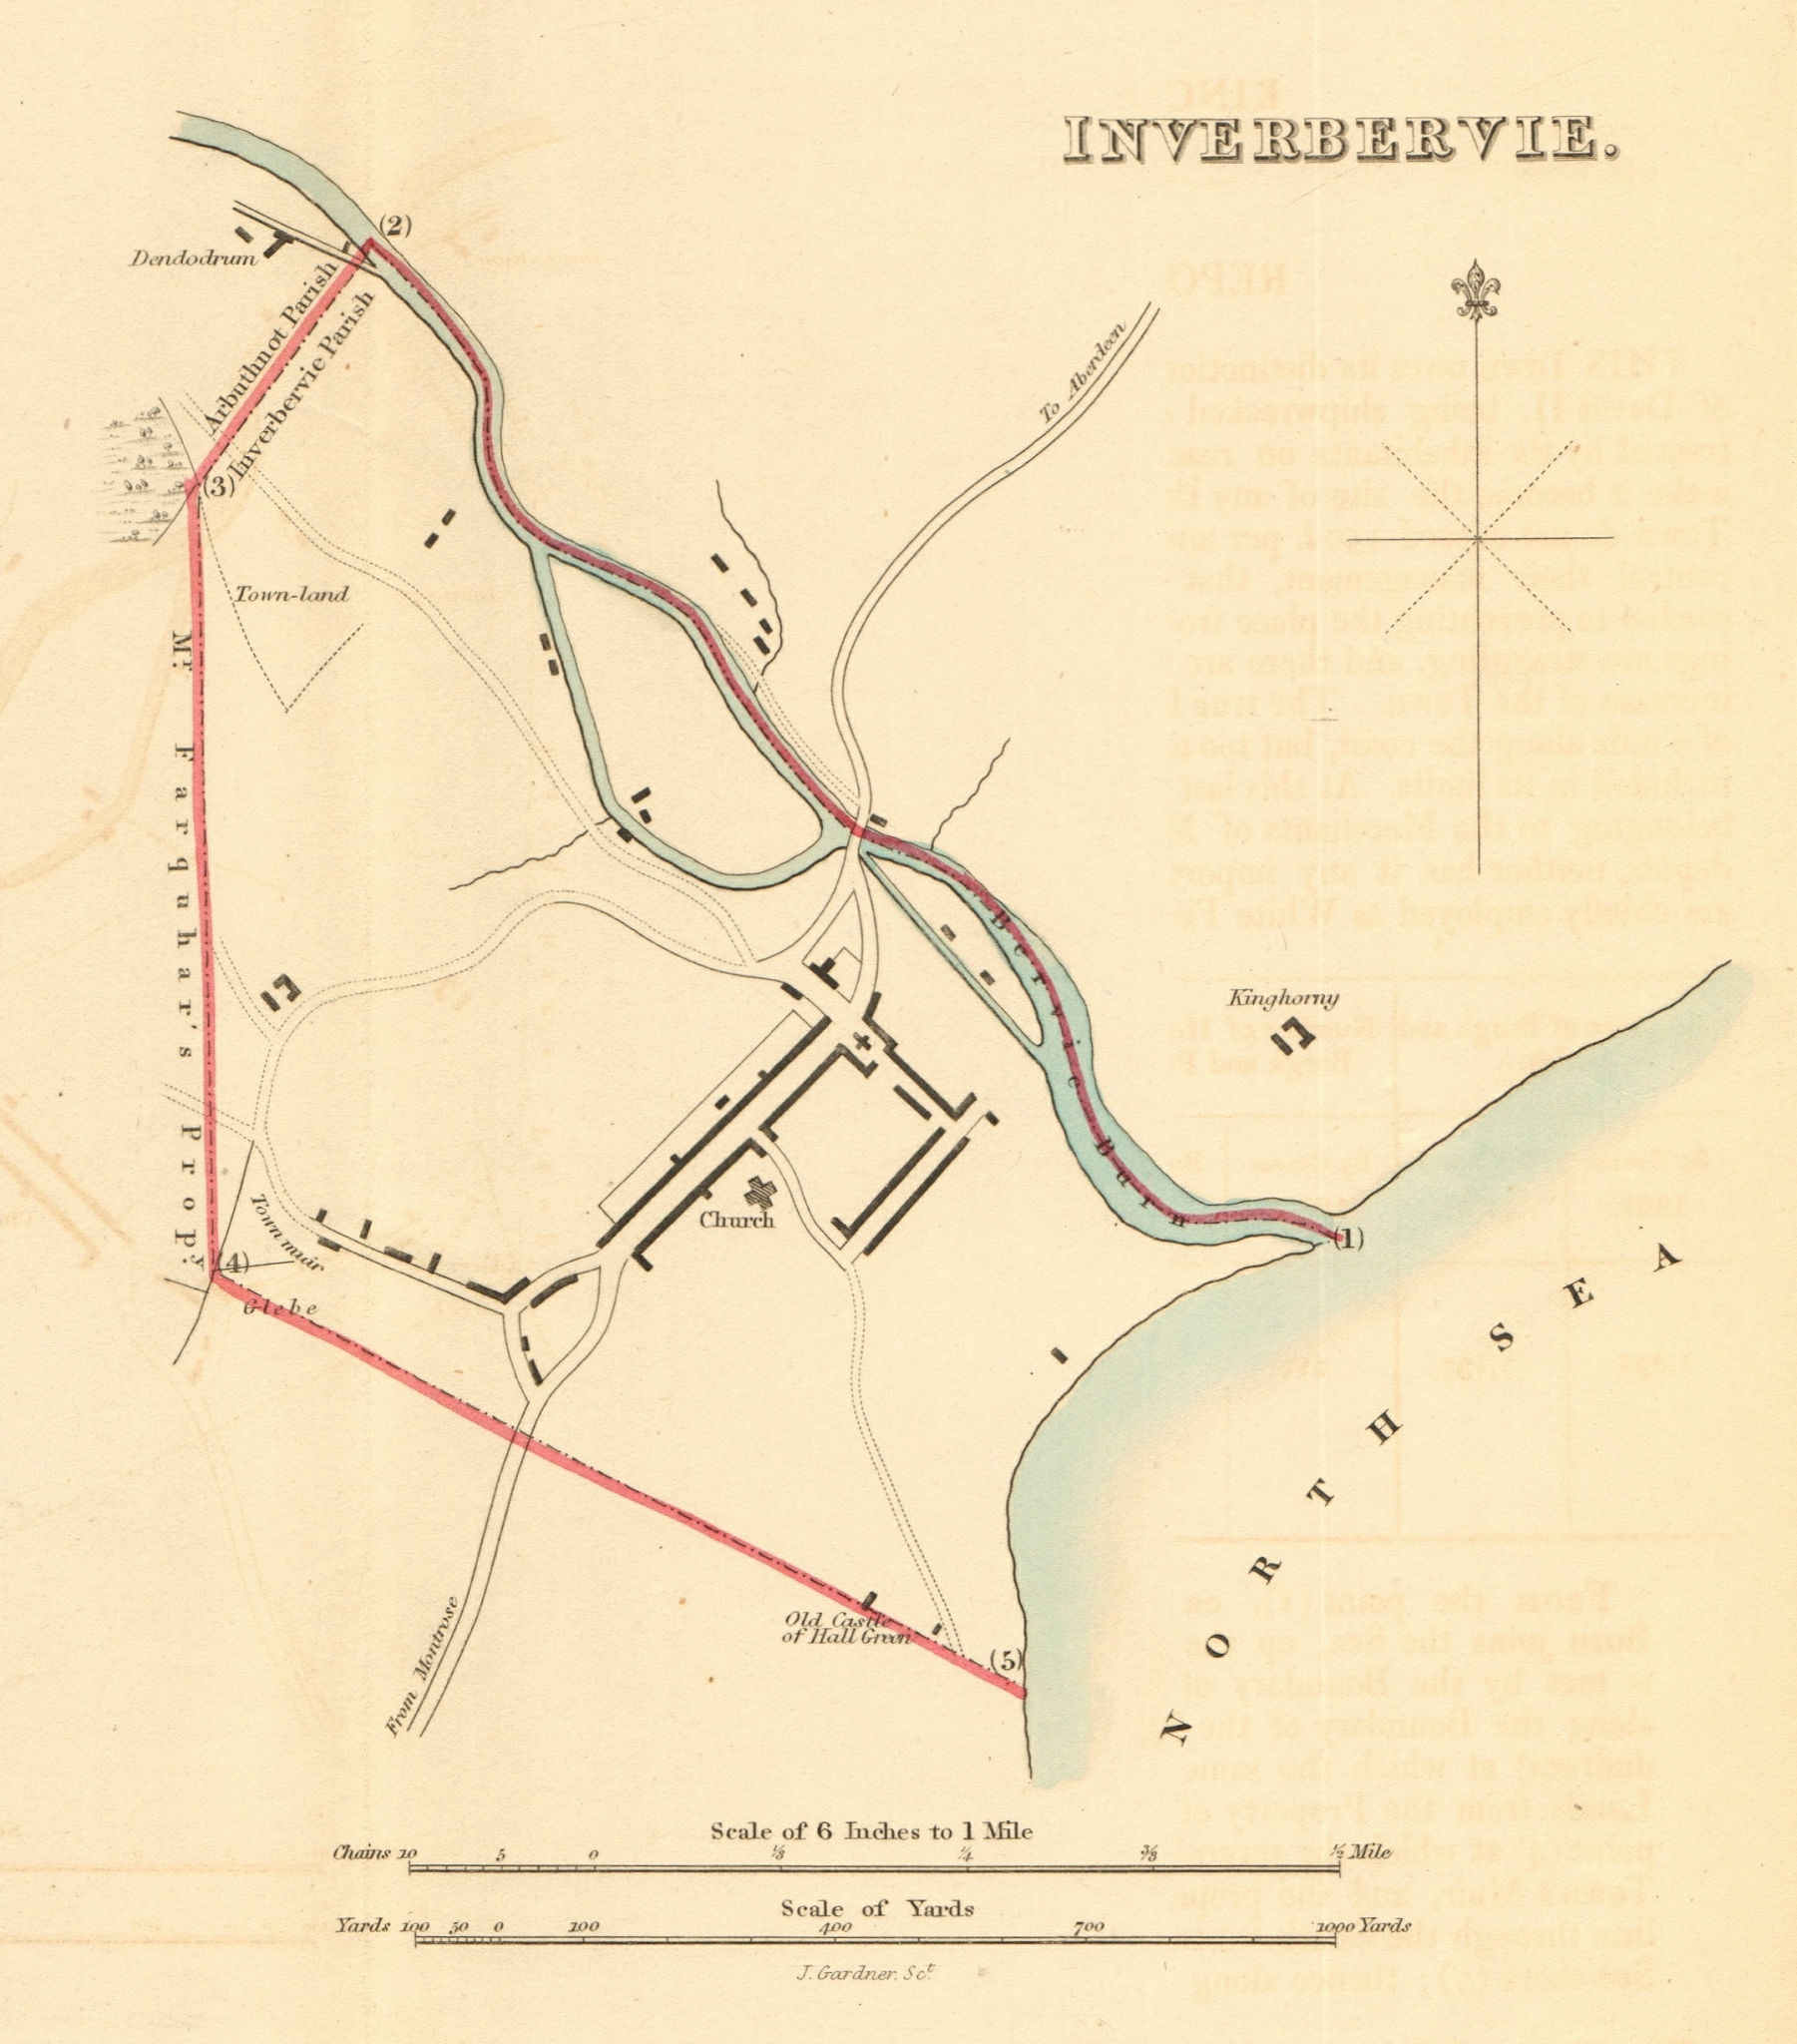 INVERBERVIE borough/town plan for the REFORM ACT. Scotland 1832 old map